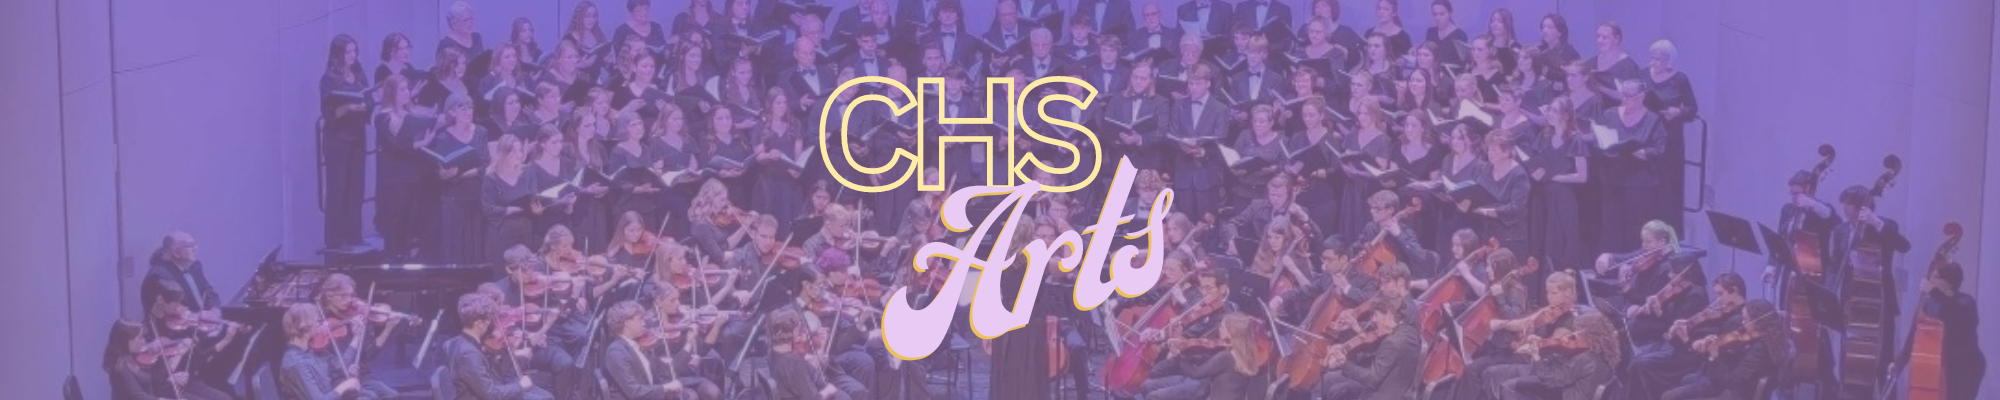 Header of Orchestra picture with Cal Arts overlay